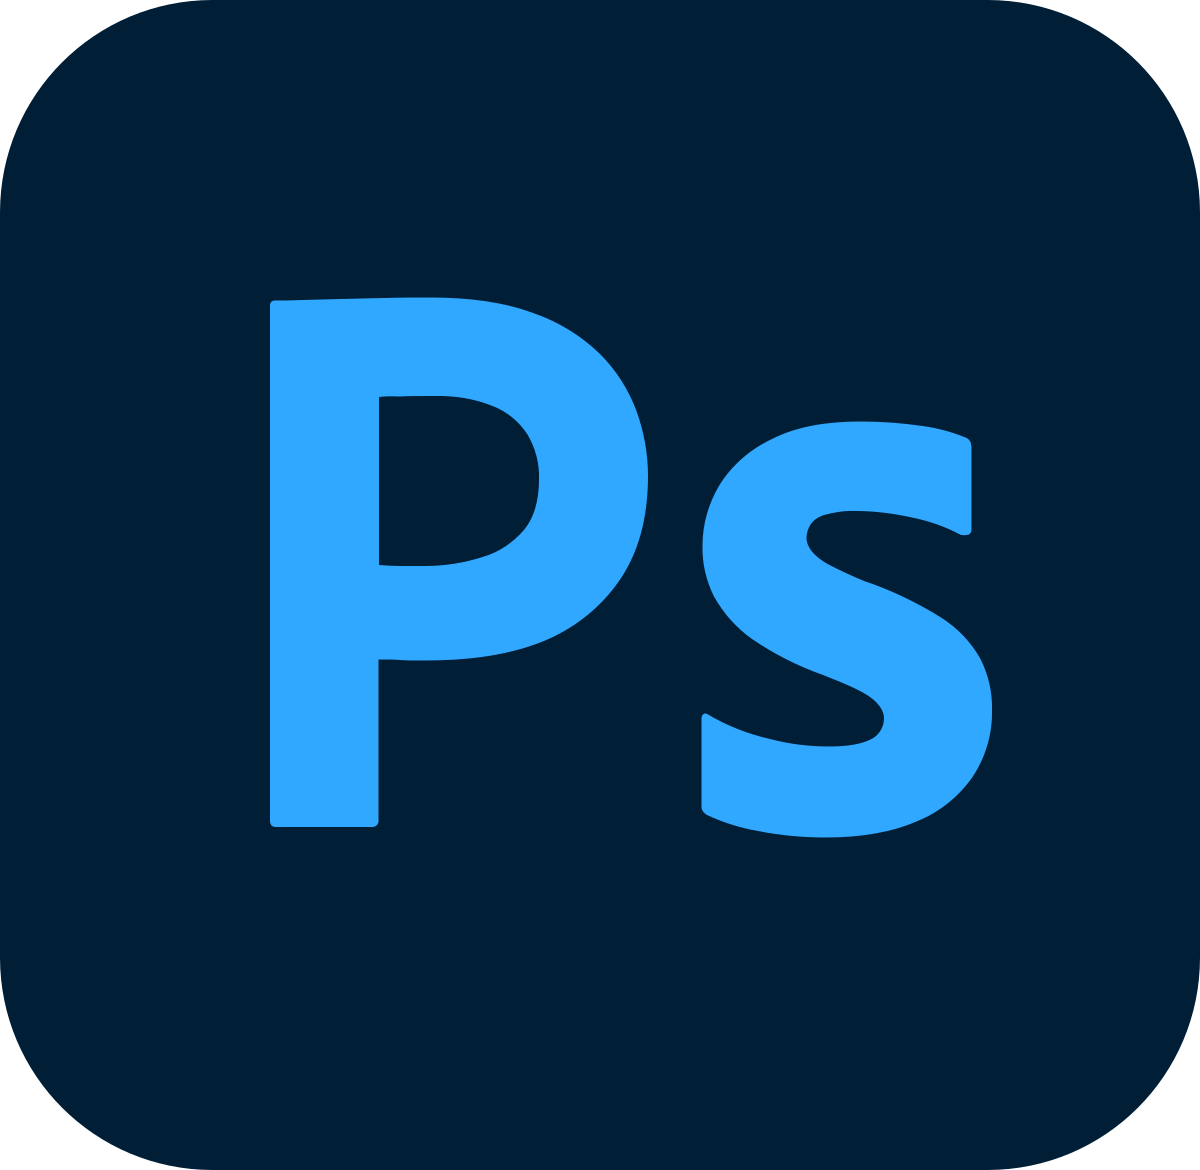 Symphysis Marketing has extensive experience with Adobe Photoshop for small businesses